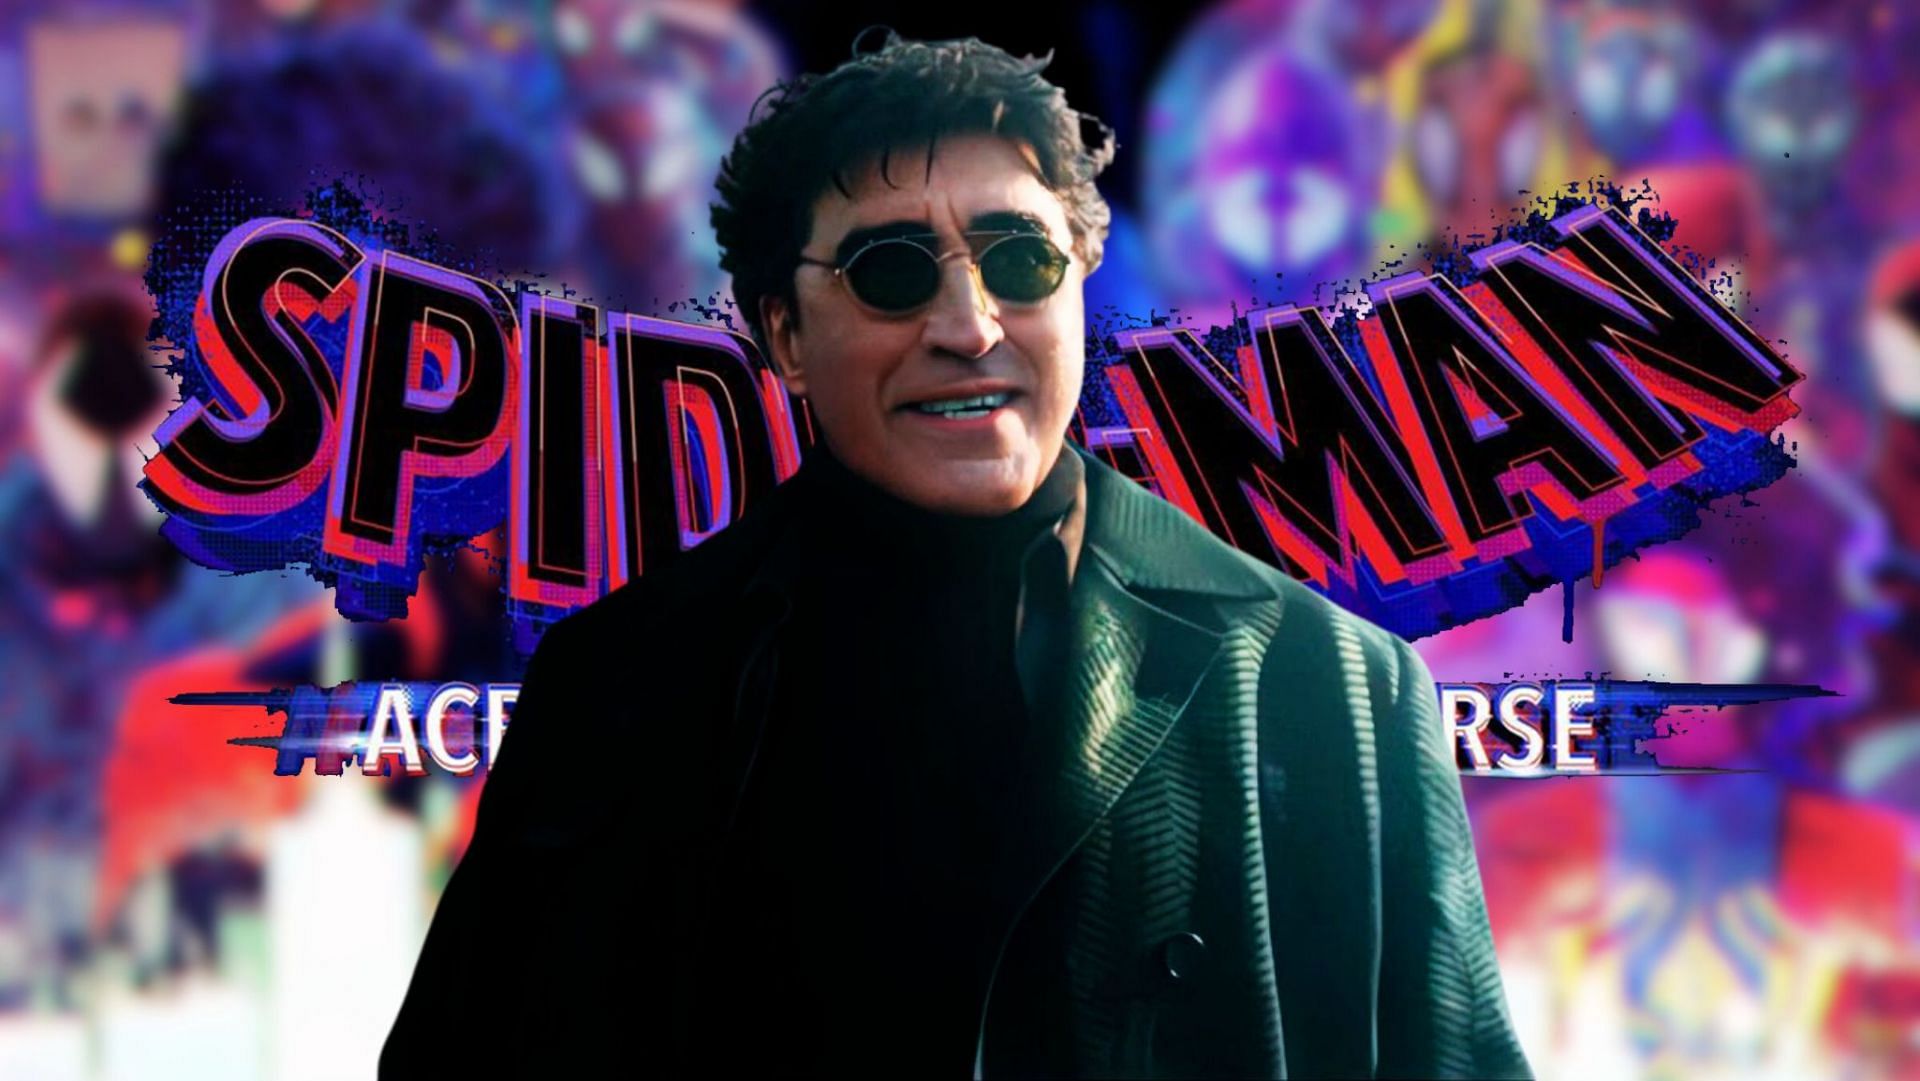 Alfred Molina as Doc Ock: The iconic villain returns in Marvel